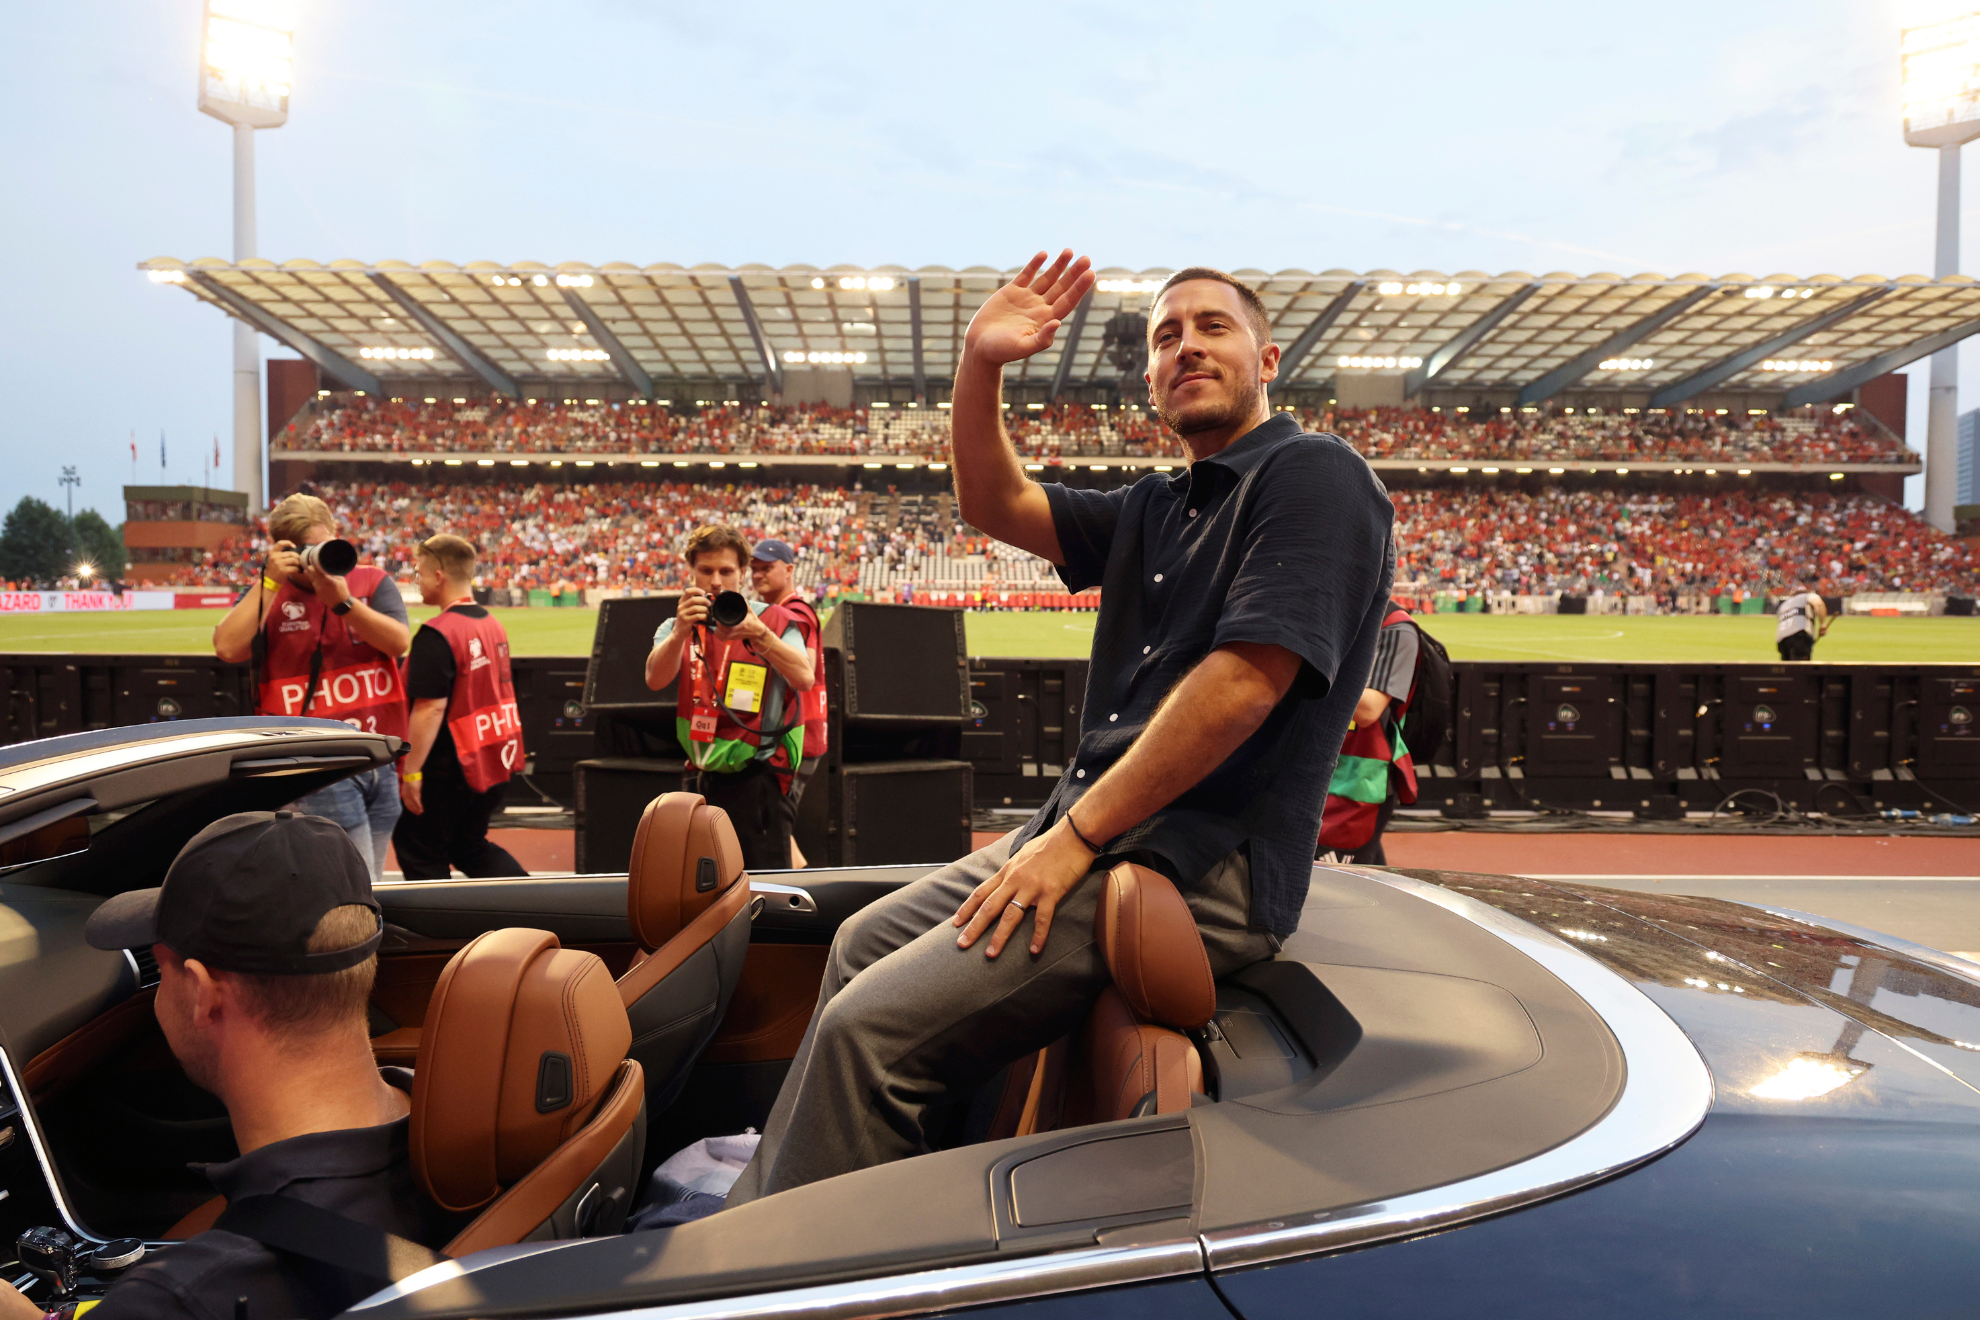 Eden Hazard appears ready to ride into the sunset.